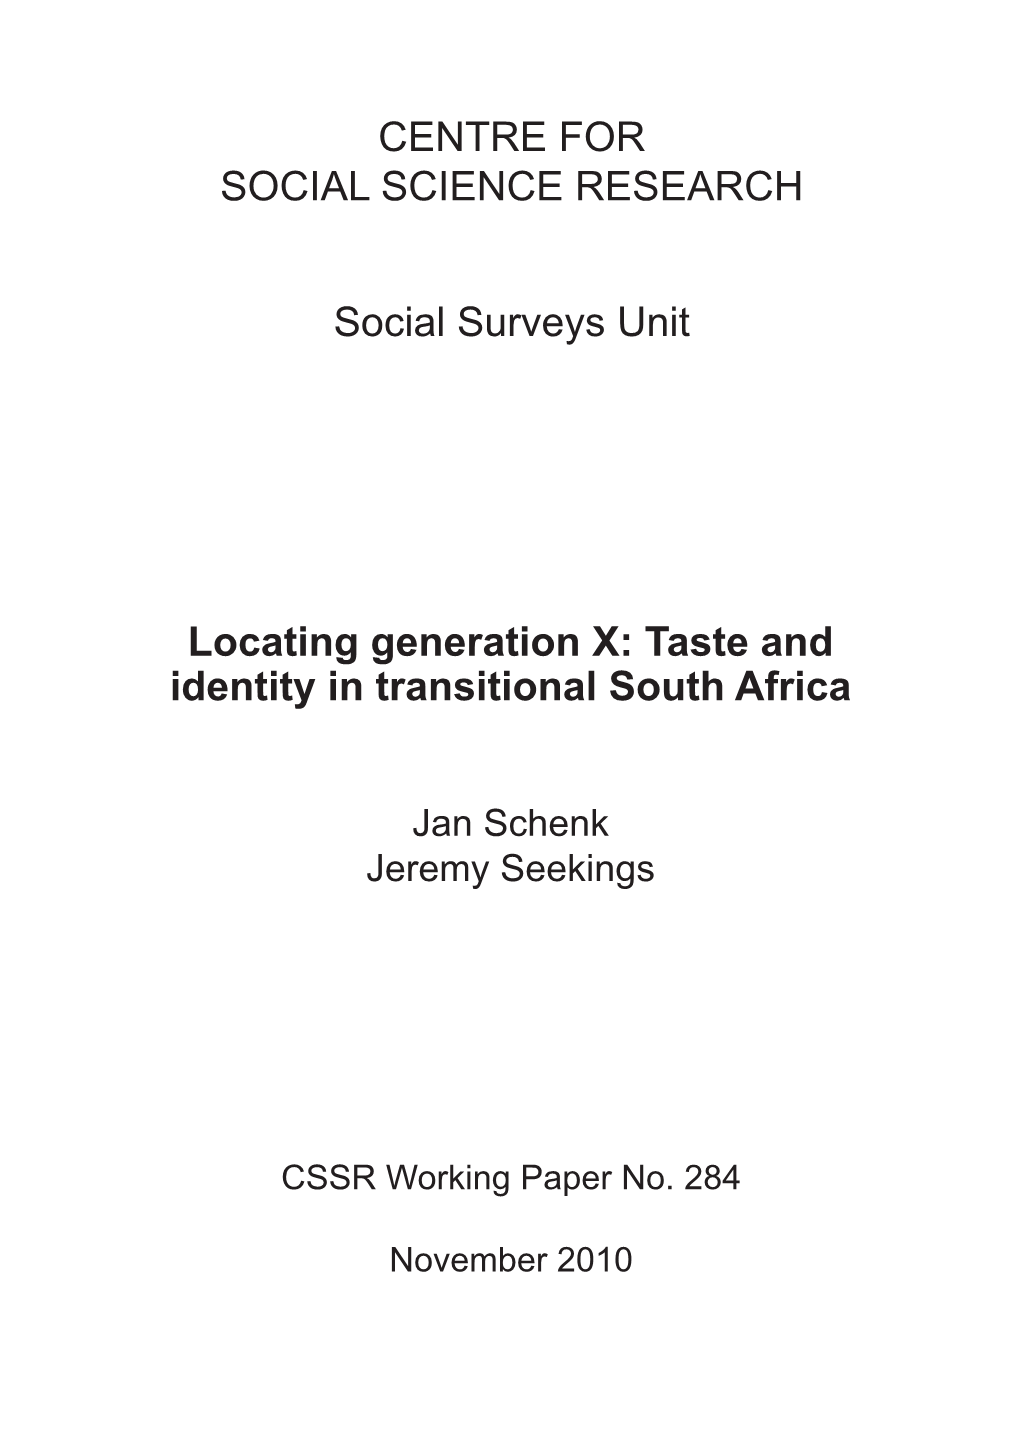 Locating Generation X: Taste and Identity in Transitional South Africa